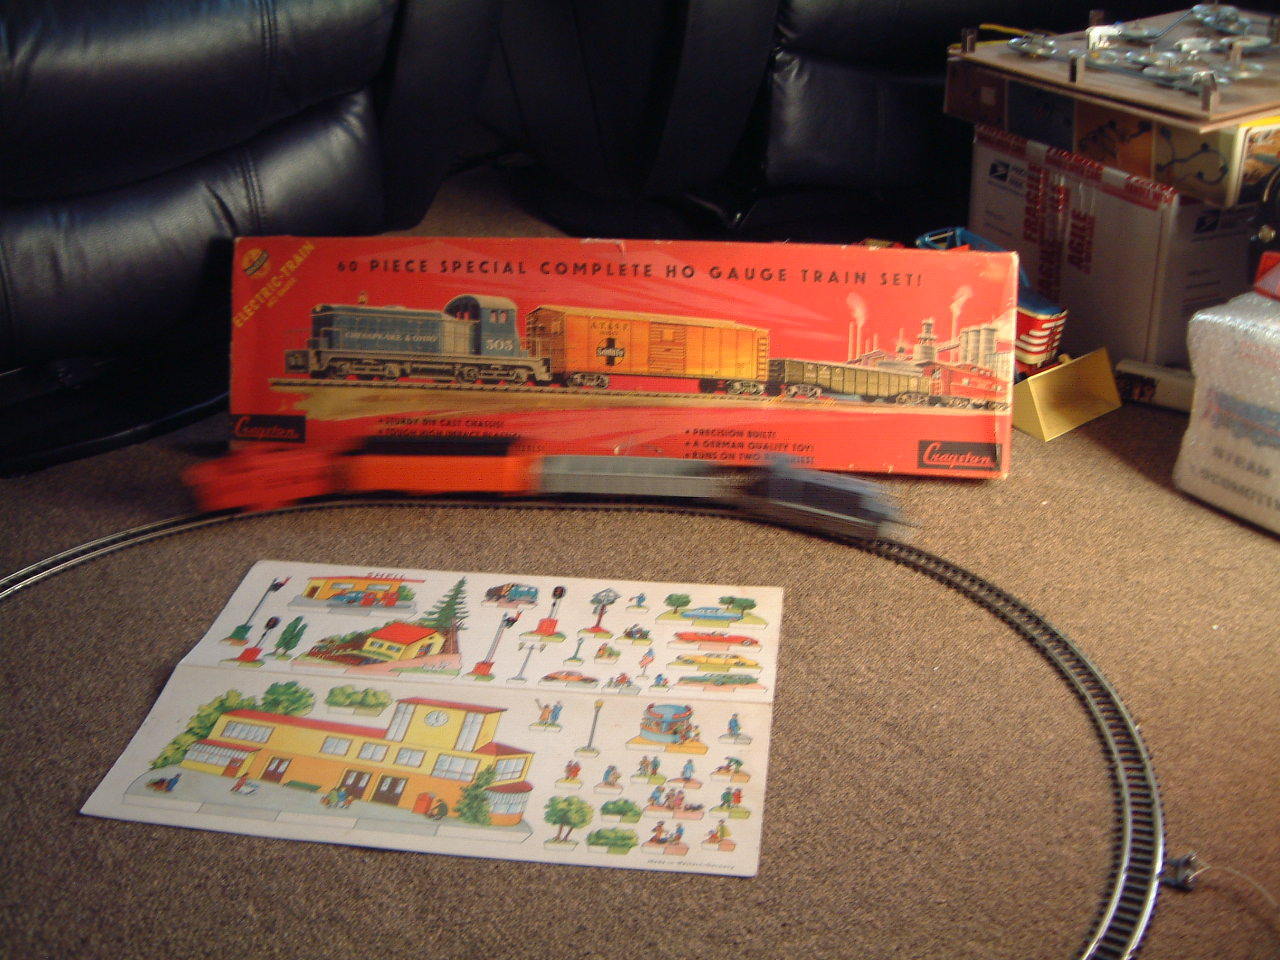 VINTAGE CRAGSTAN B/O TRAIN MADE BY DISTLER. COMPLETE/WORKS W/ALL 60 PIECES & BOX